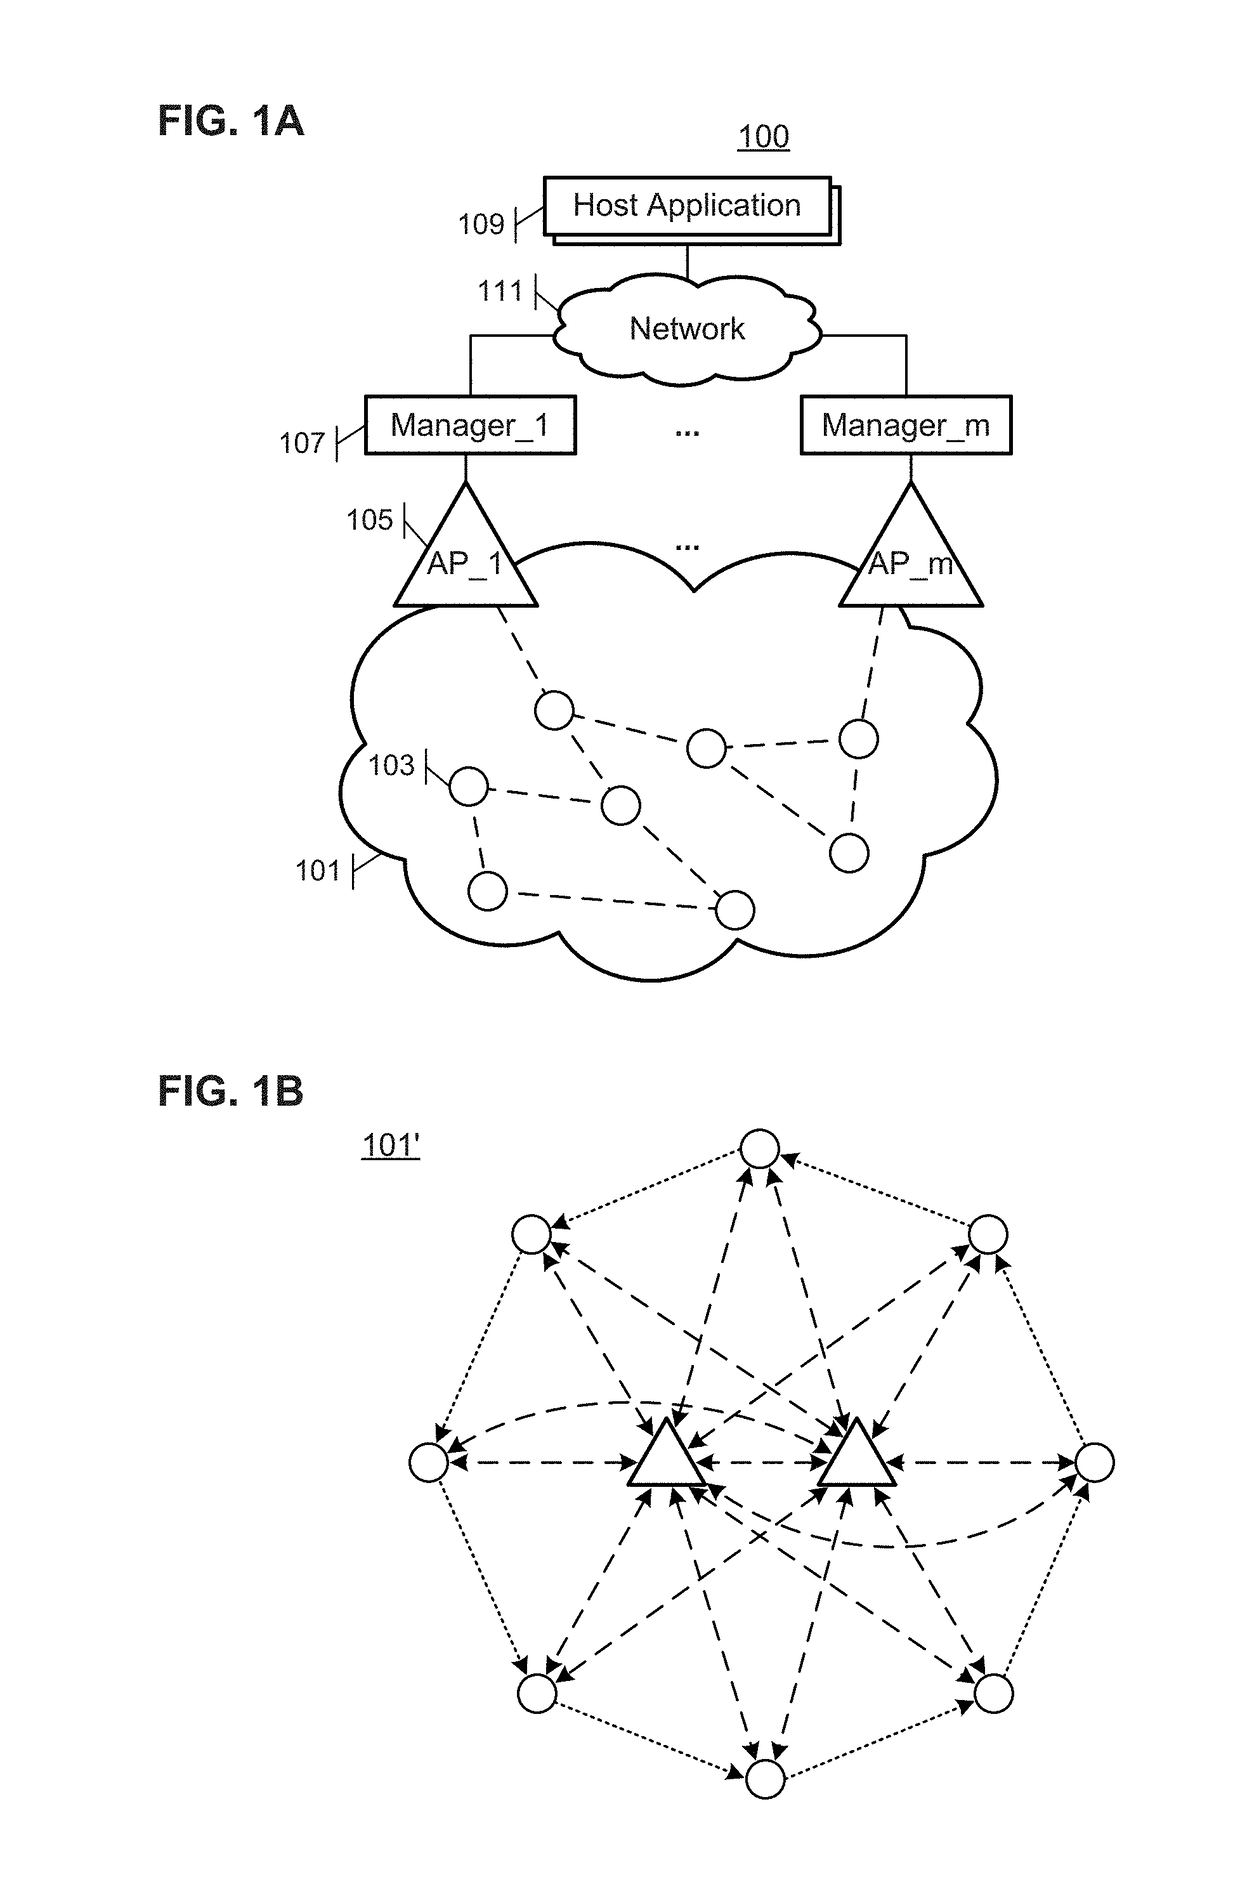 Fast joining in wireless mesh networks with predetermined physical topologies